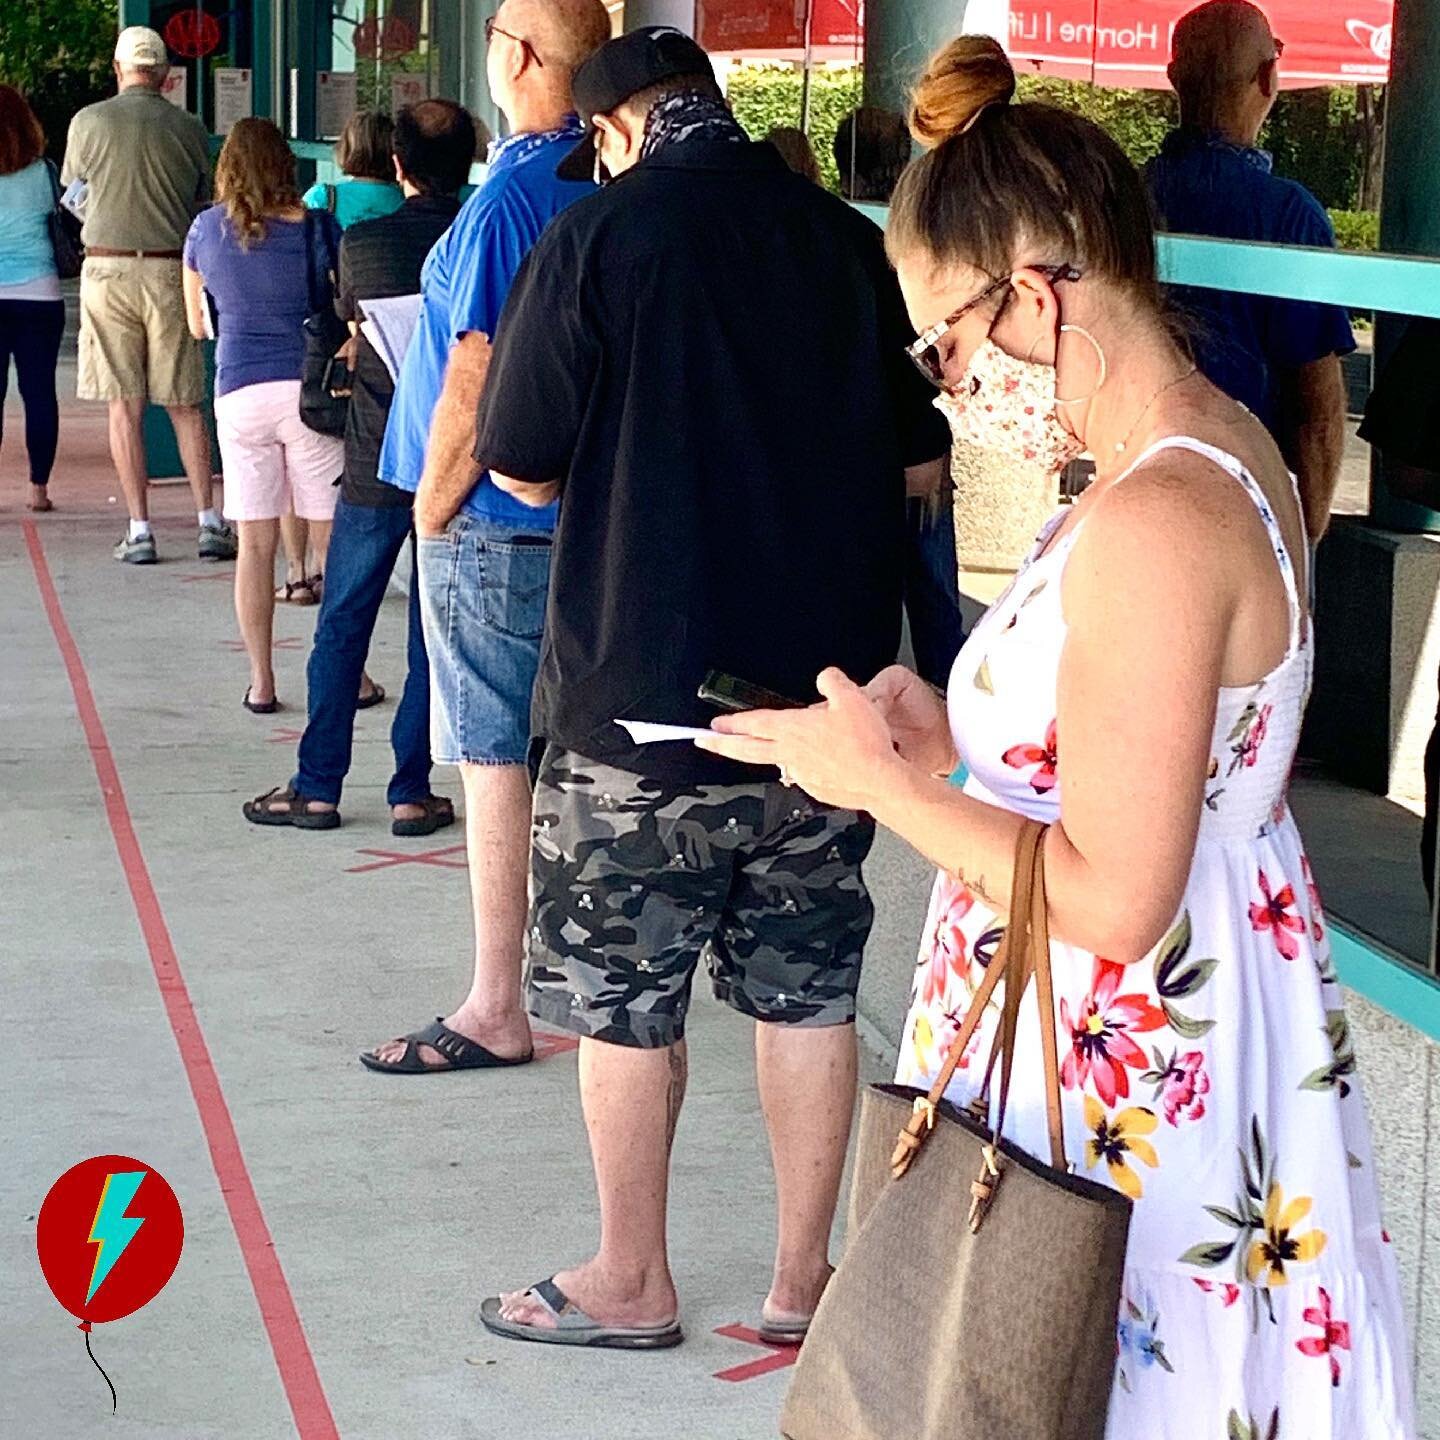 The lines are long but people are strong! Are you early voting or waiting until the big day? 

---

#votevotevote
#vote2020
#election2020
#Biden
#trump
#voteblue
#votered
#vote 
#rockthevote
#getoutthevote
#votesaveamerica
#absenteeballot
#theelectio